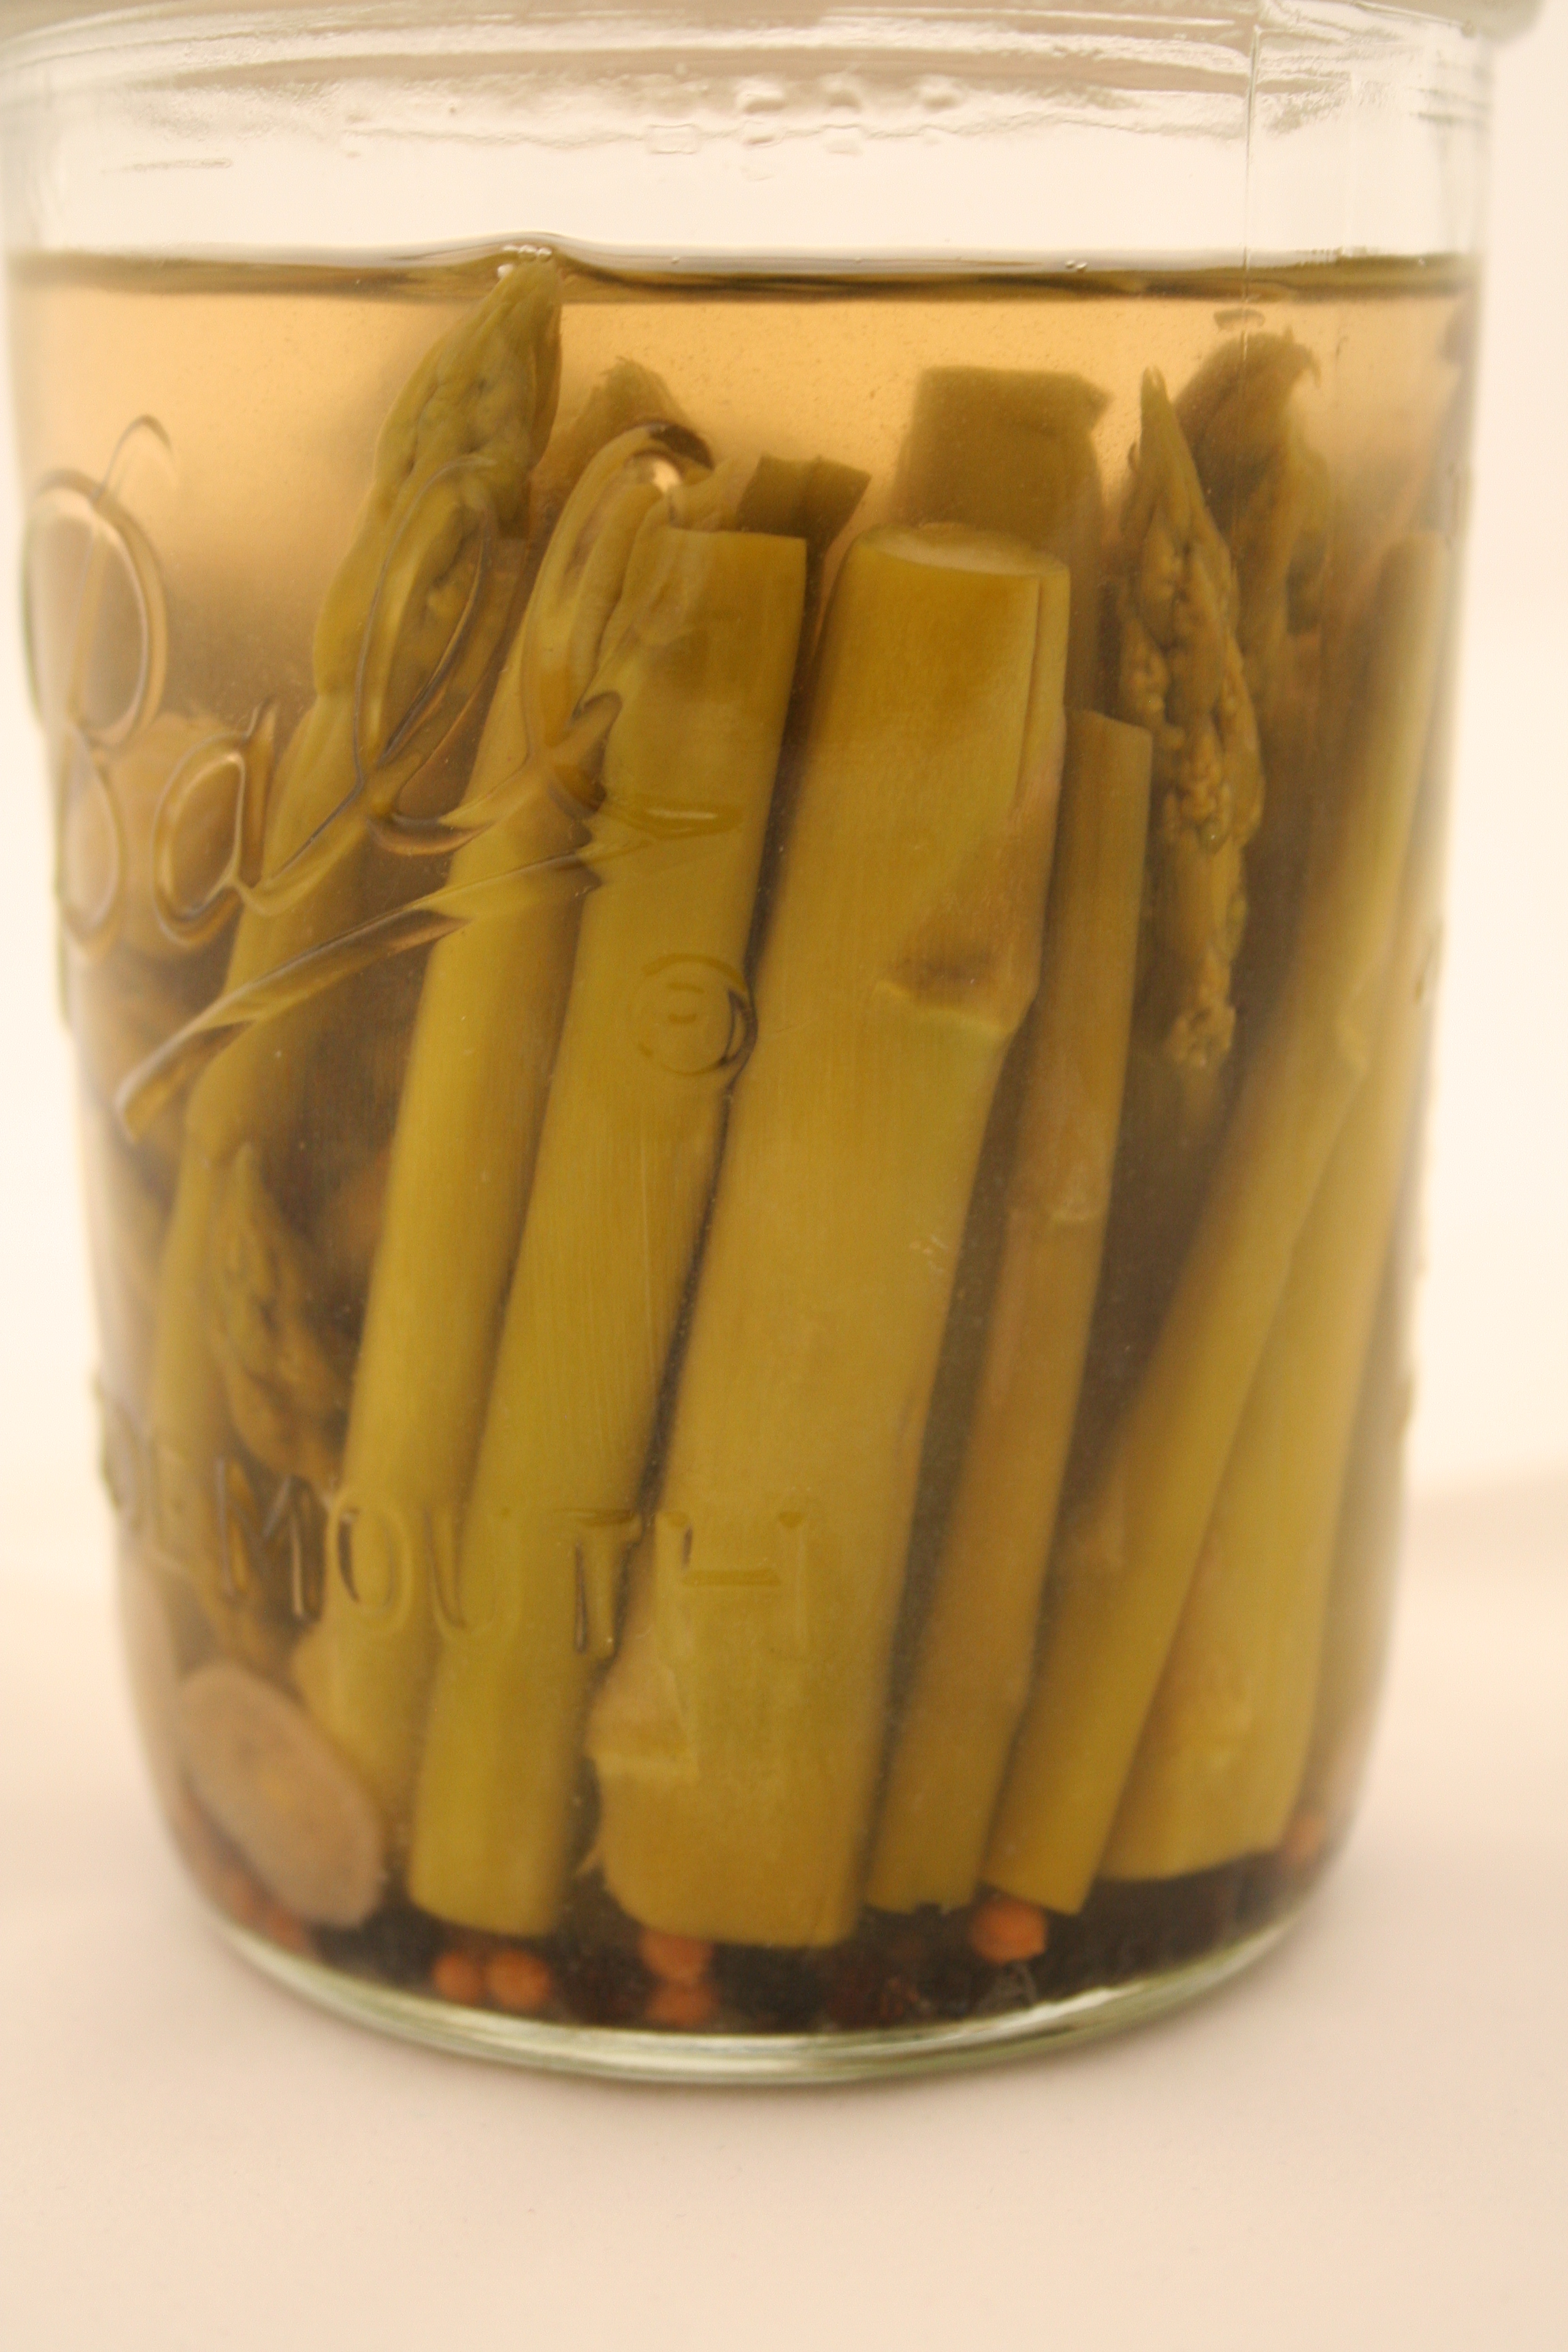 Truly Pickled Asparagus